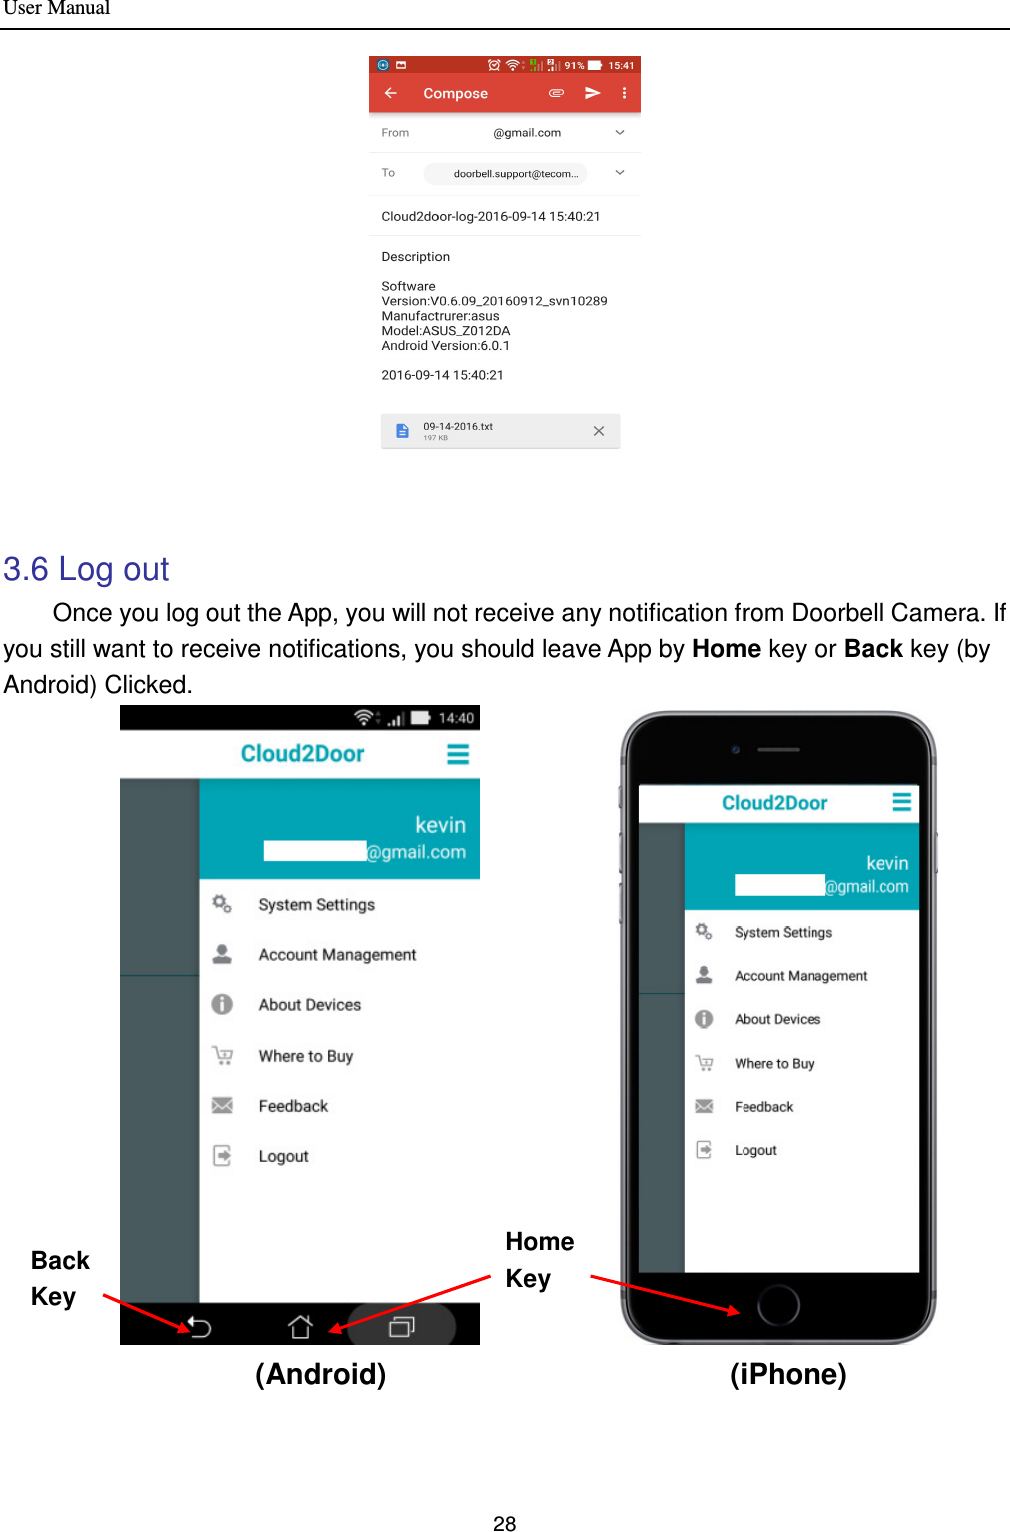 User Manual 28    3.6 Log out         Once you log out the App, you will not receive any notification from Doorbell Camera. If you still want to receive notifications, you should leave App by Home key or Back key (by Android) Clicked.                  (Android) (iPhone)     Home      Key Back  Key 